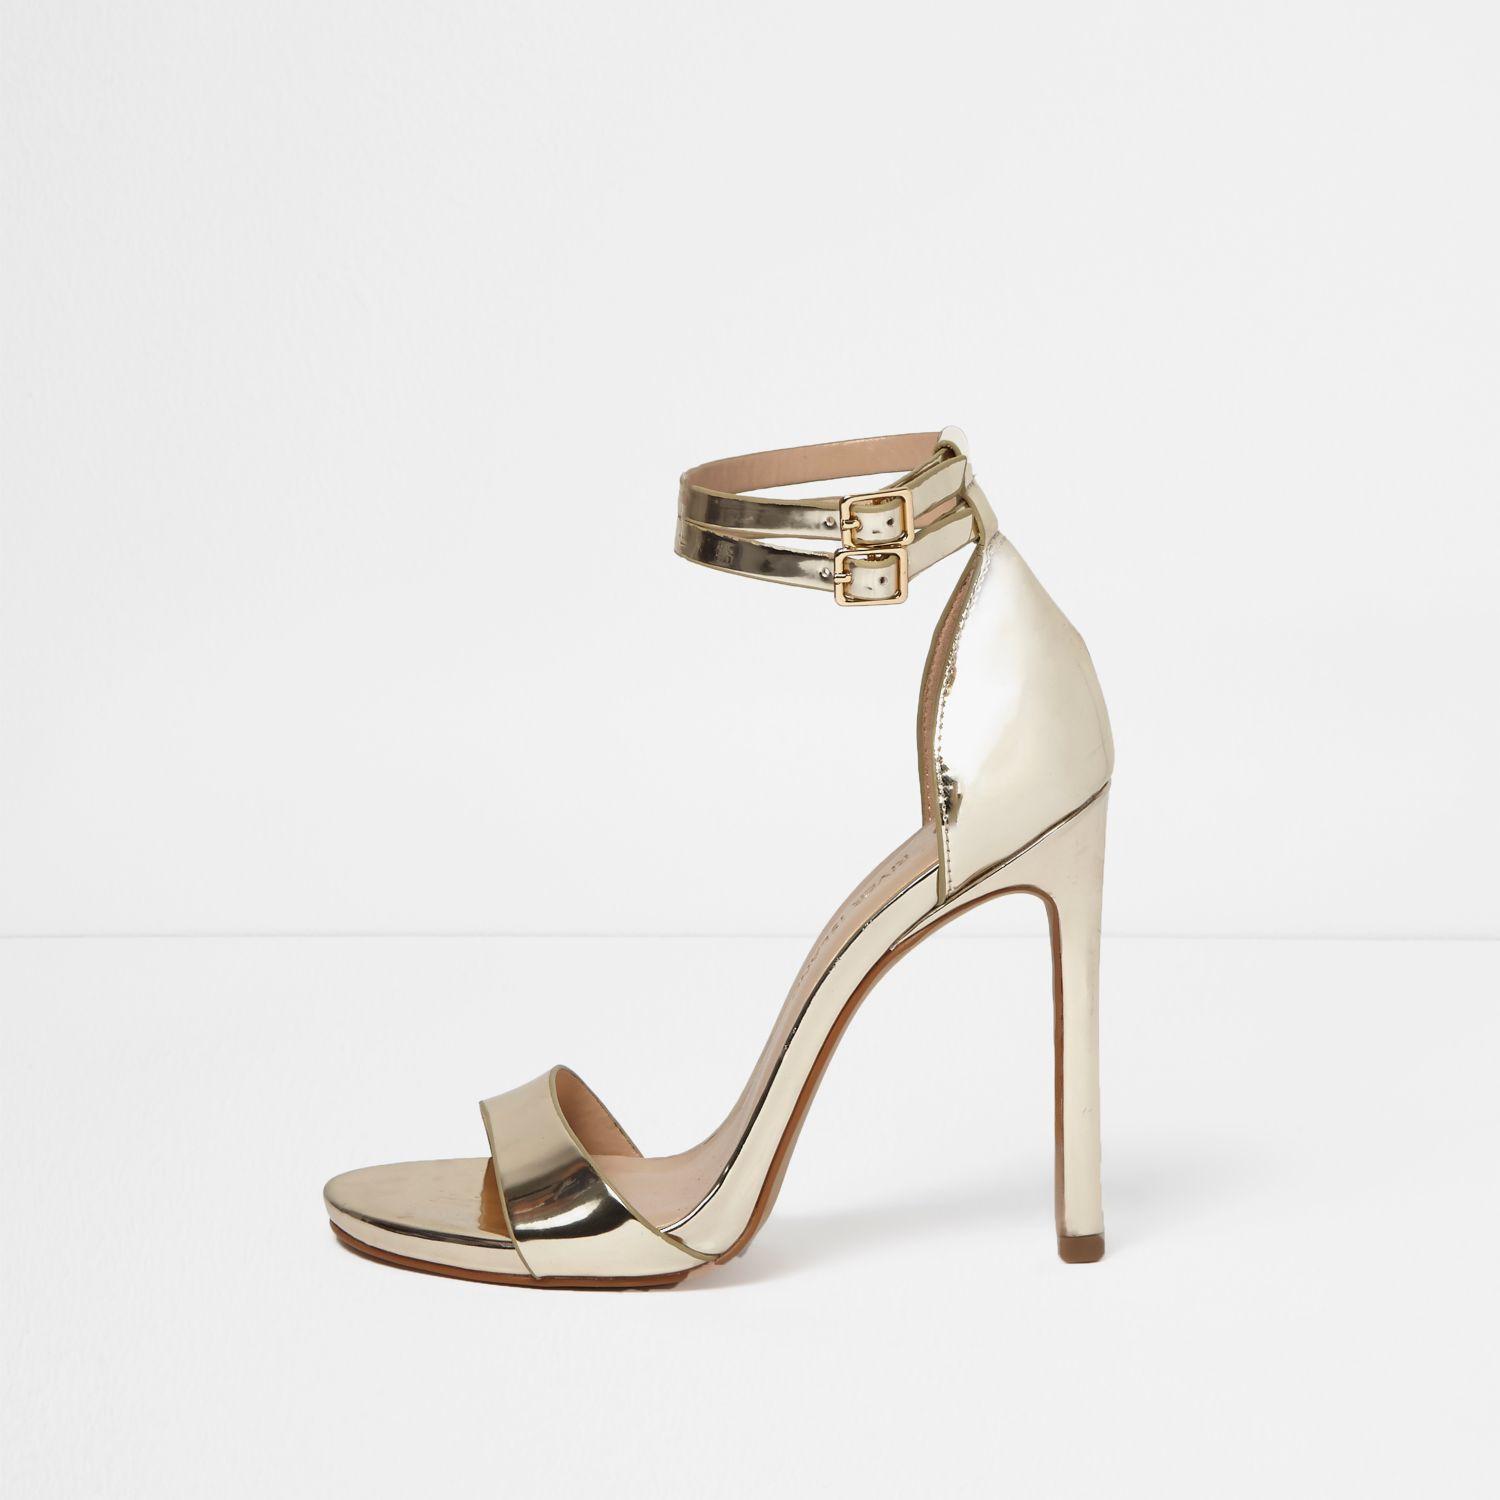 River Island Gold Strappy Barely There Heels in Metallic | Lyst